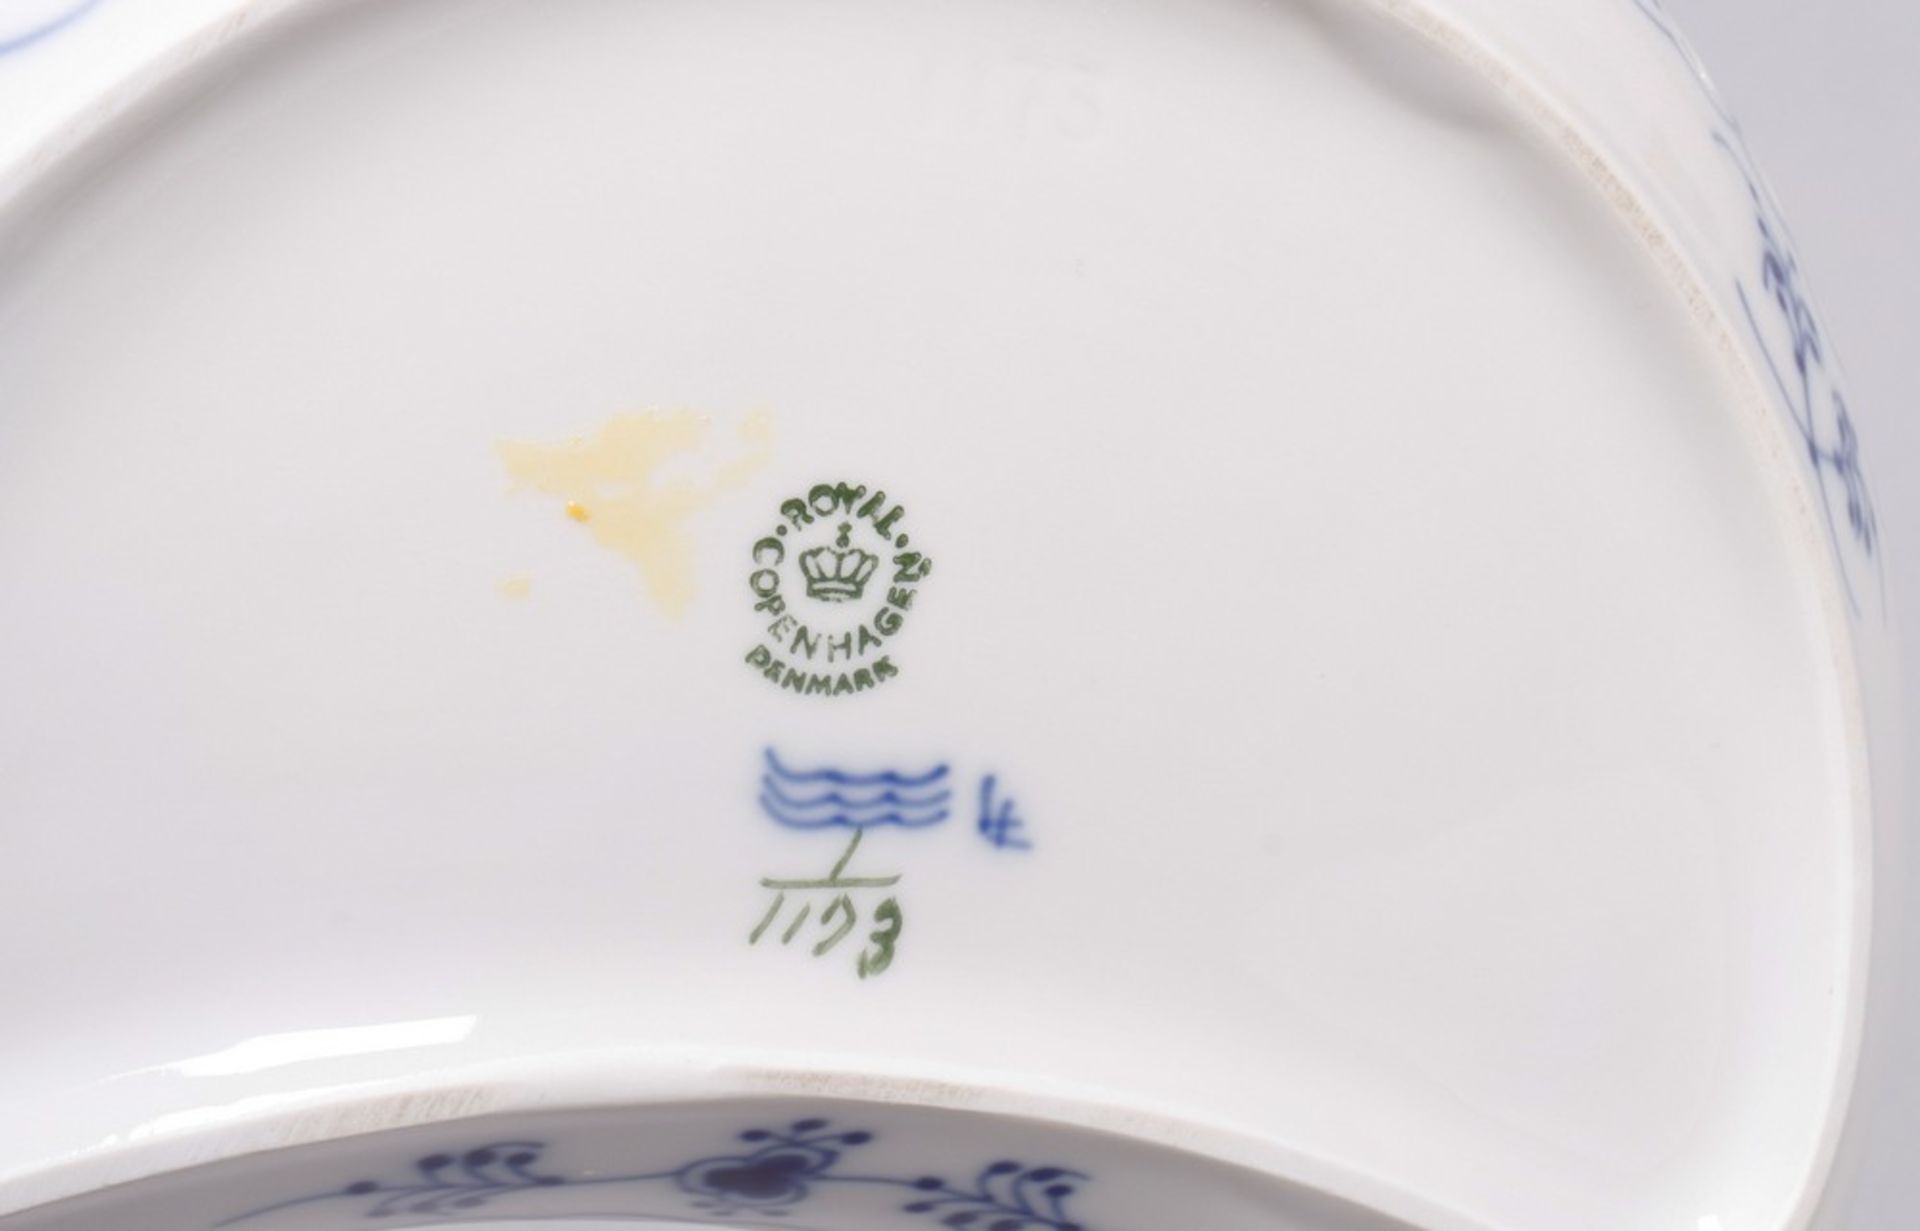 Small lot of porcelain, Royal Copenhagen, late 20th C., "Musselmalet" decor - Image 3 of 8